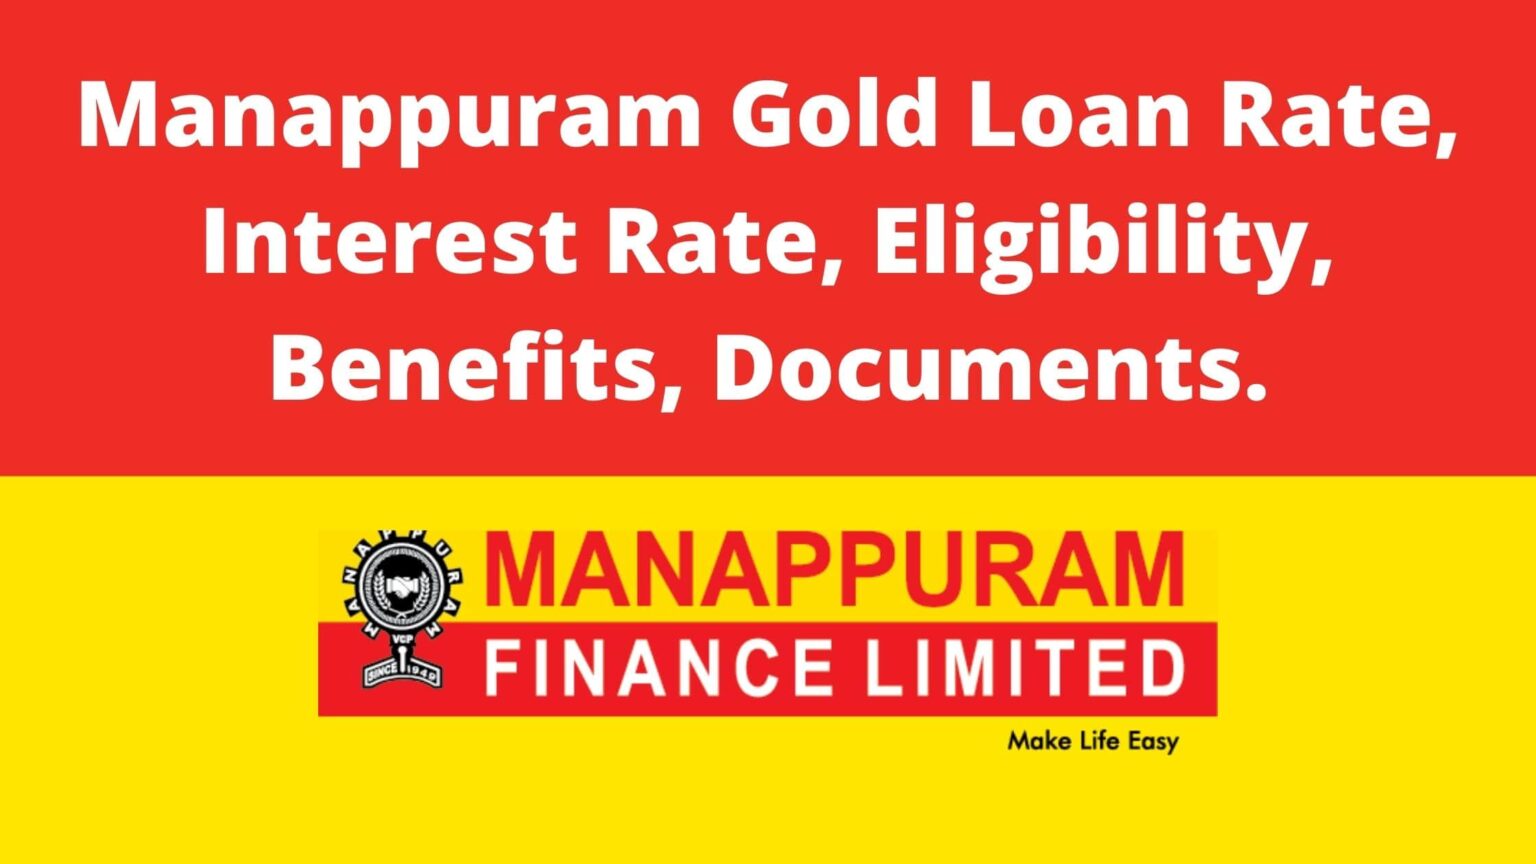 Manappuram Gold Loan Rate Per Gram And Eligibility